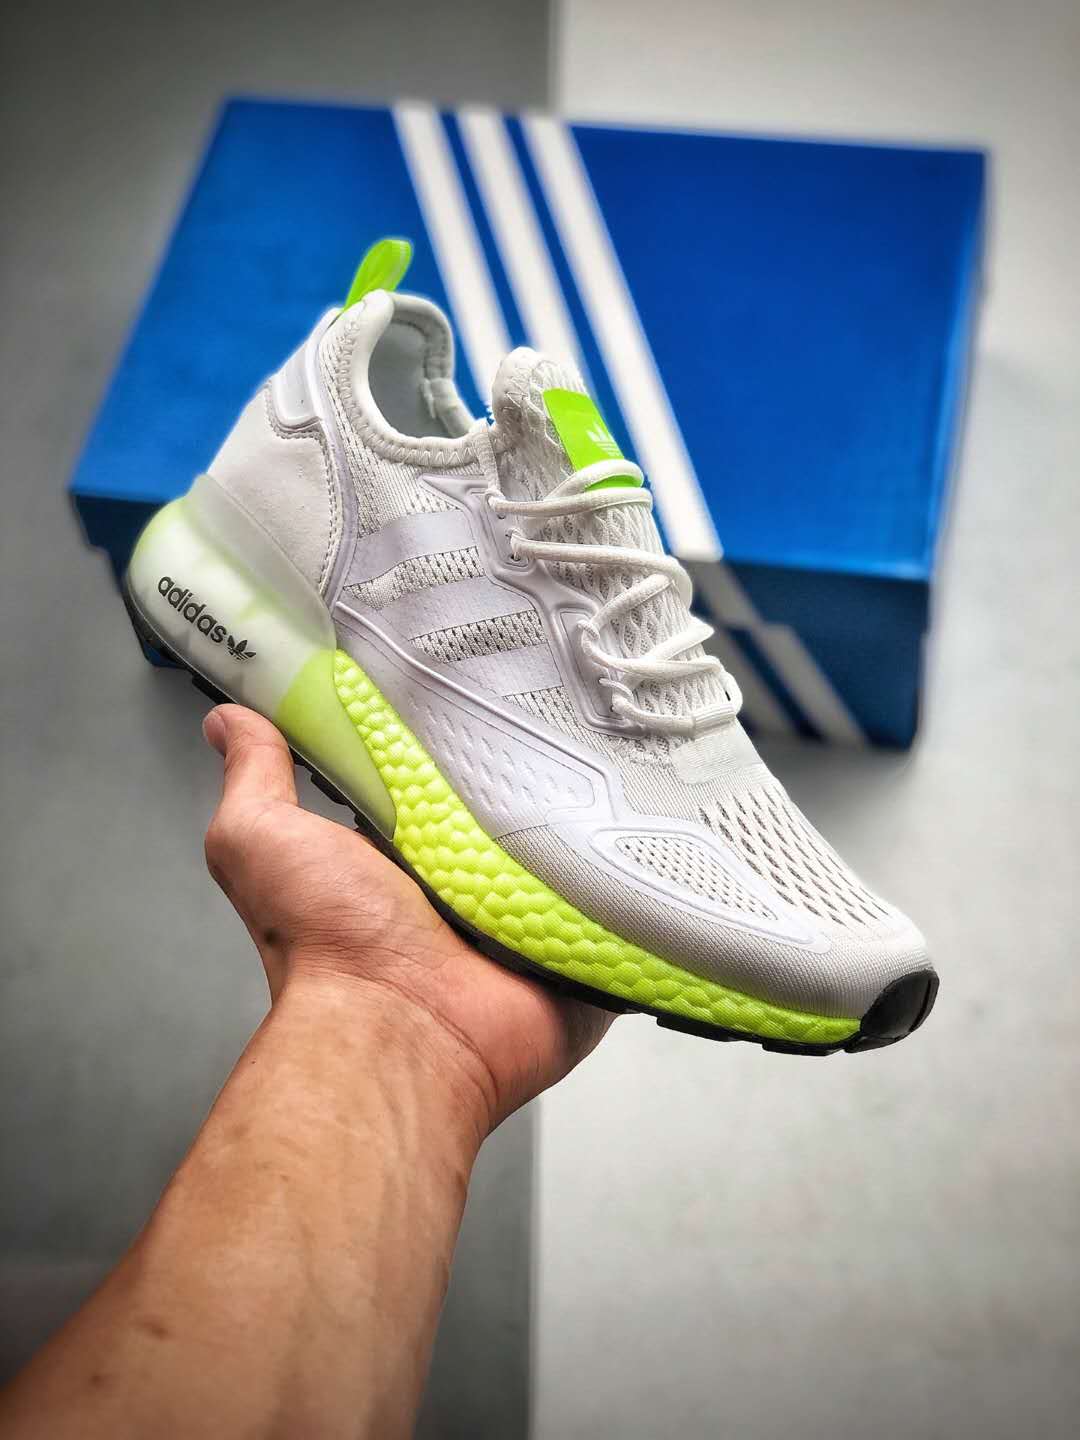 Adidas ZX 2K Boost Cloud White Solar Yellow FW0480 - Stylish and Comfortable Sneakers